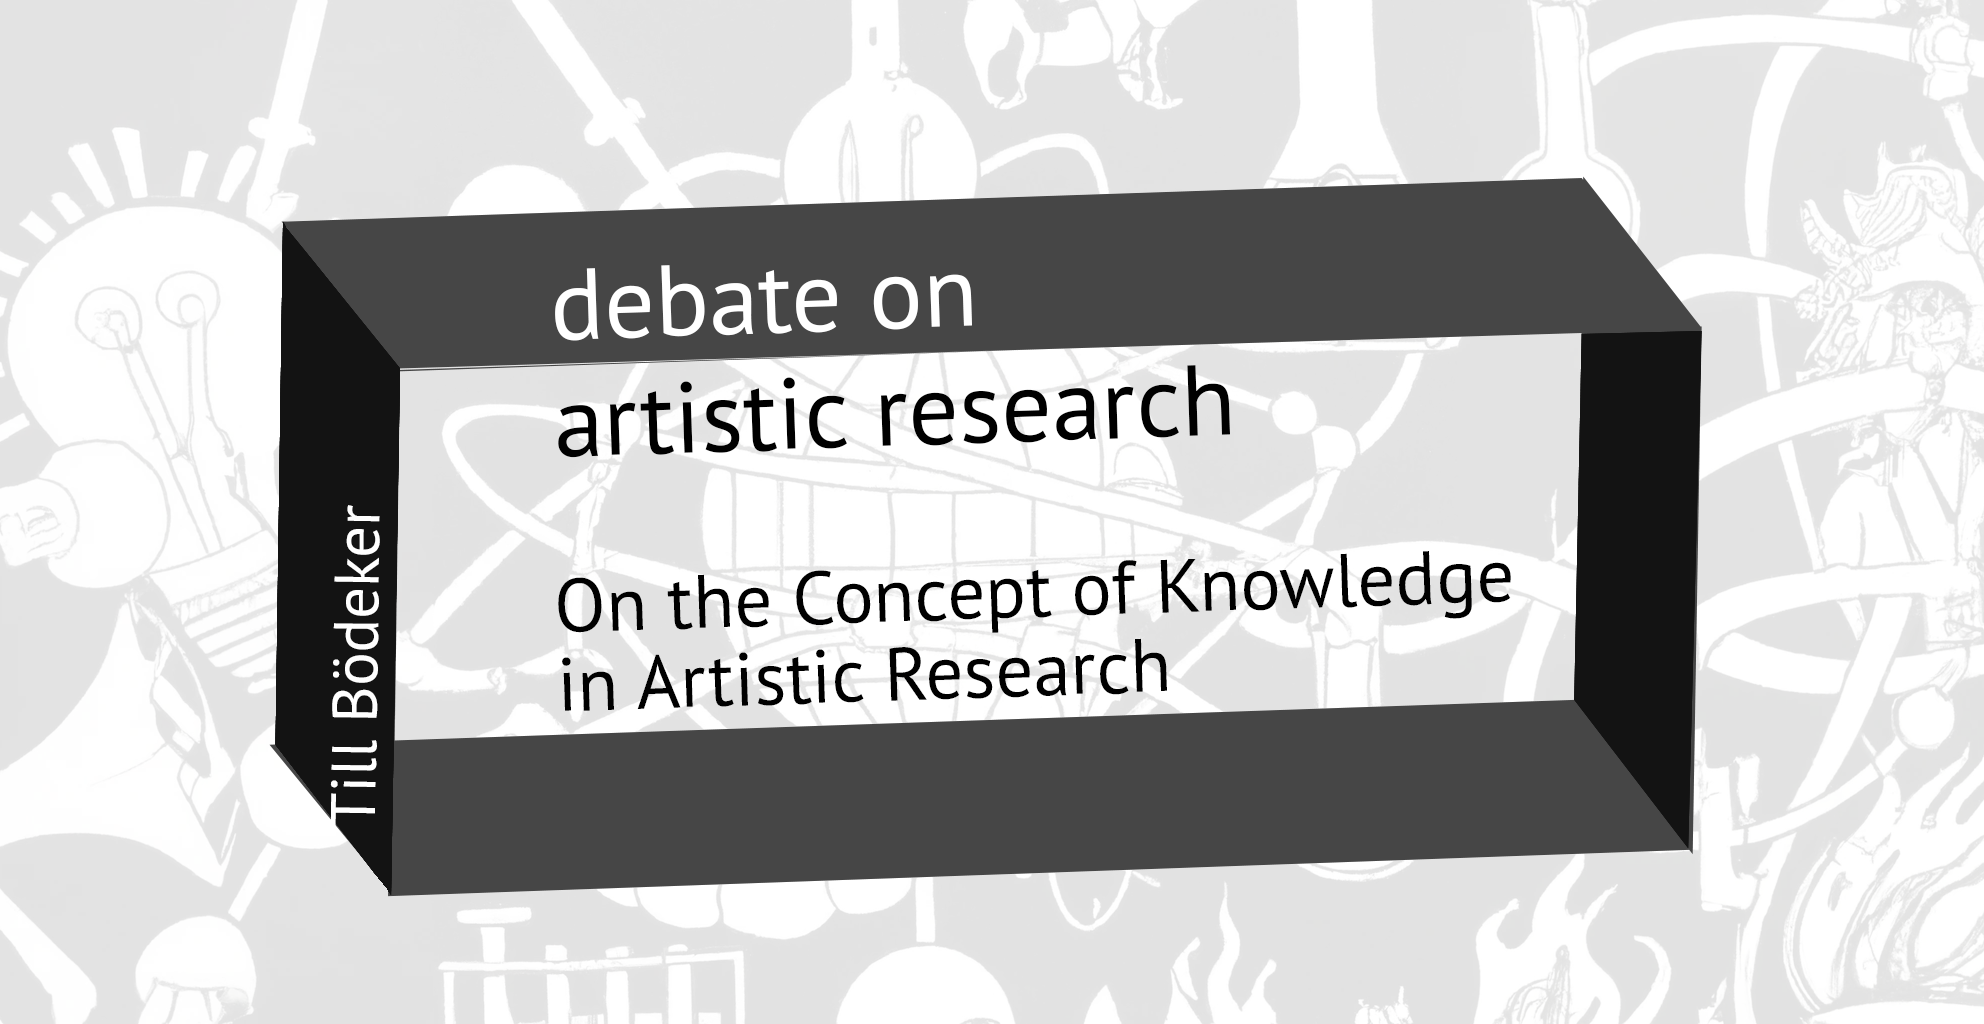 Till Bödeker: On the Concept of Knowledge in Artistic Research. Summary